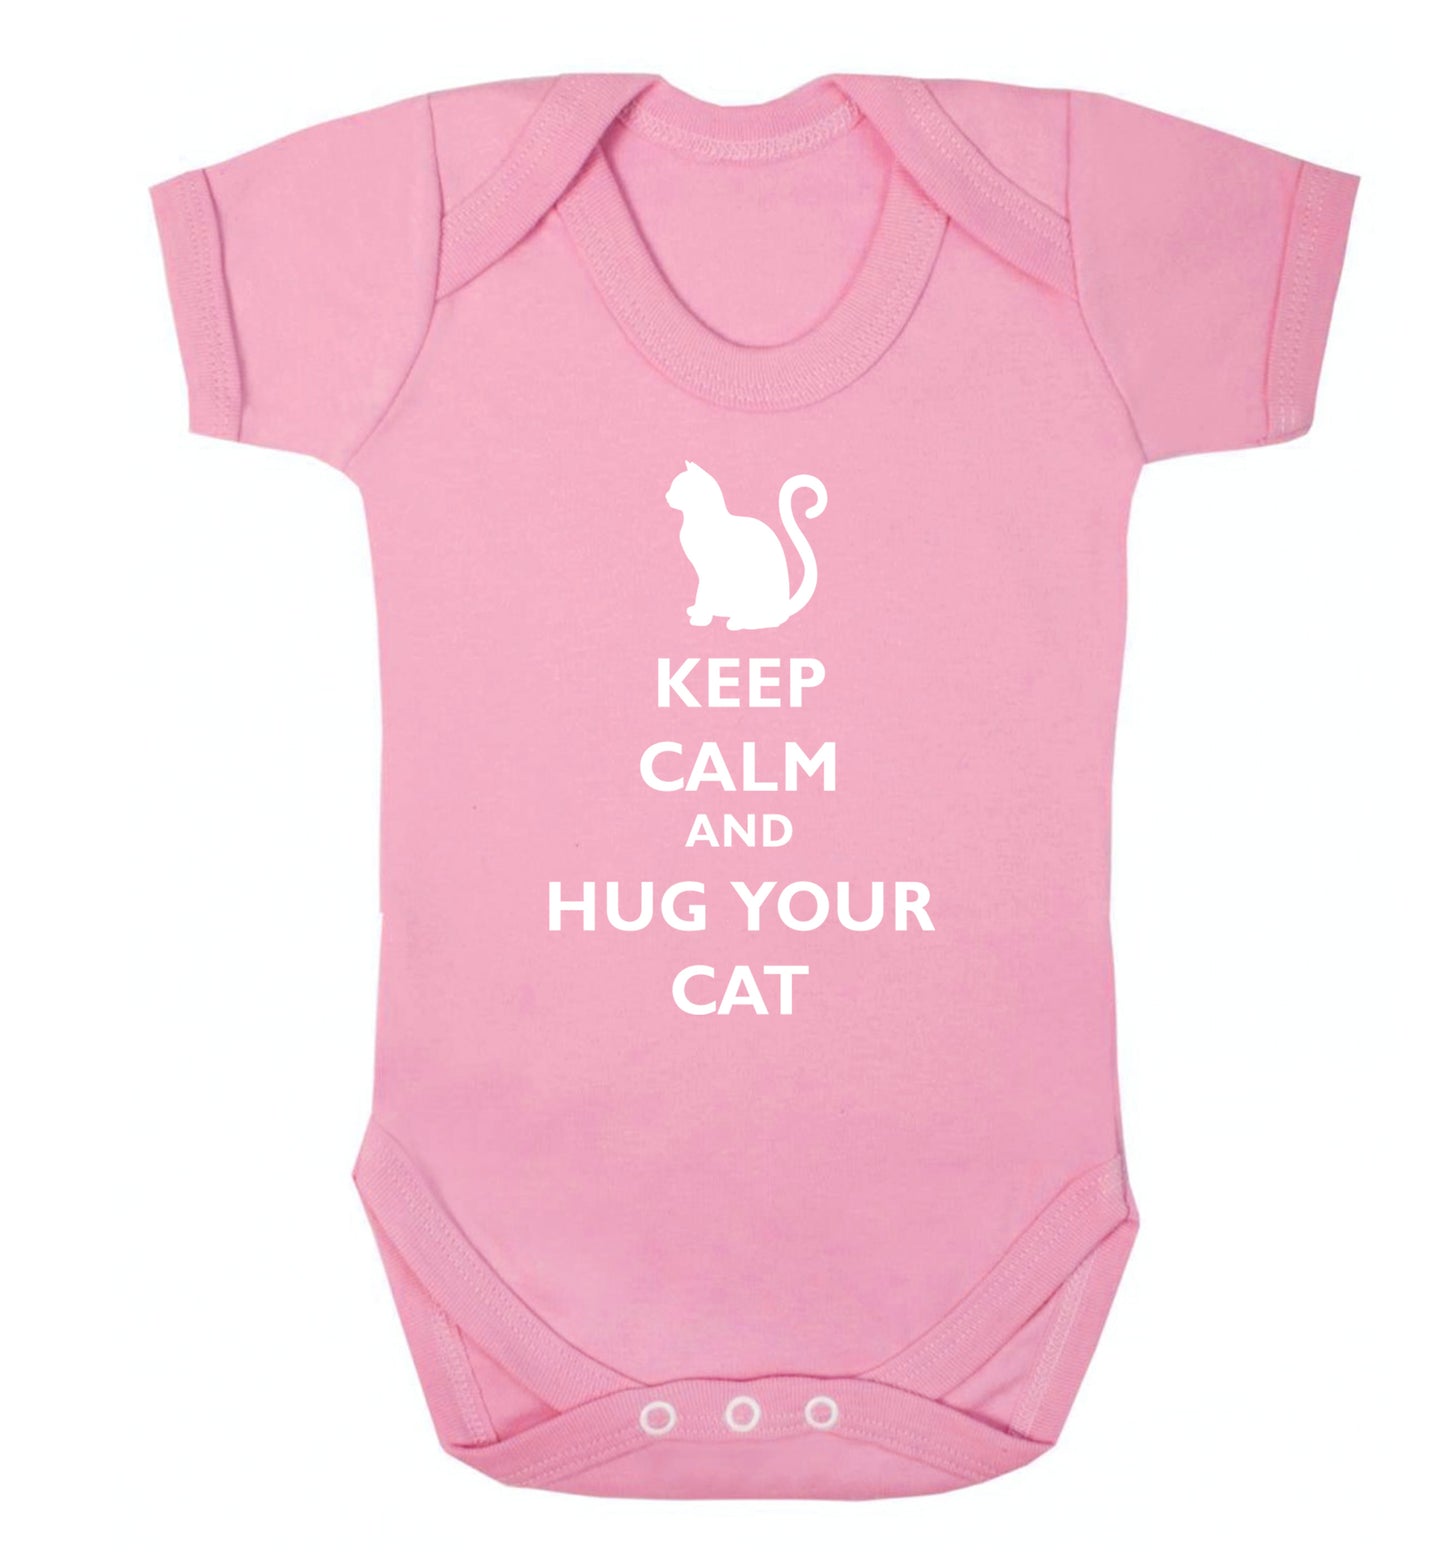 Keep calm and hug your cat Baby Vest pale pink 18-24 months